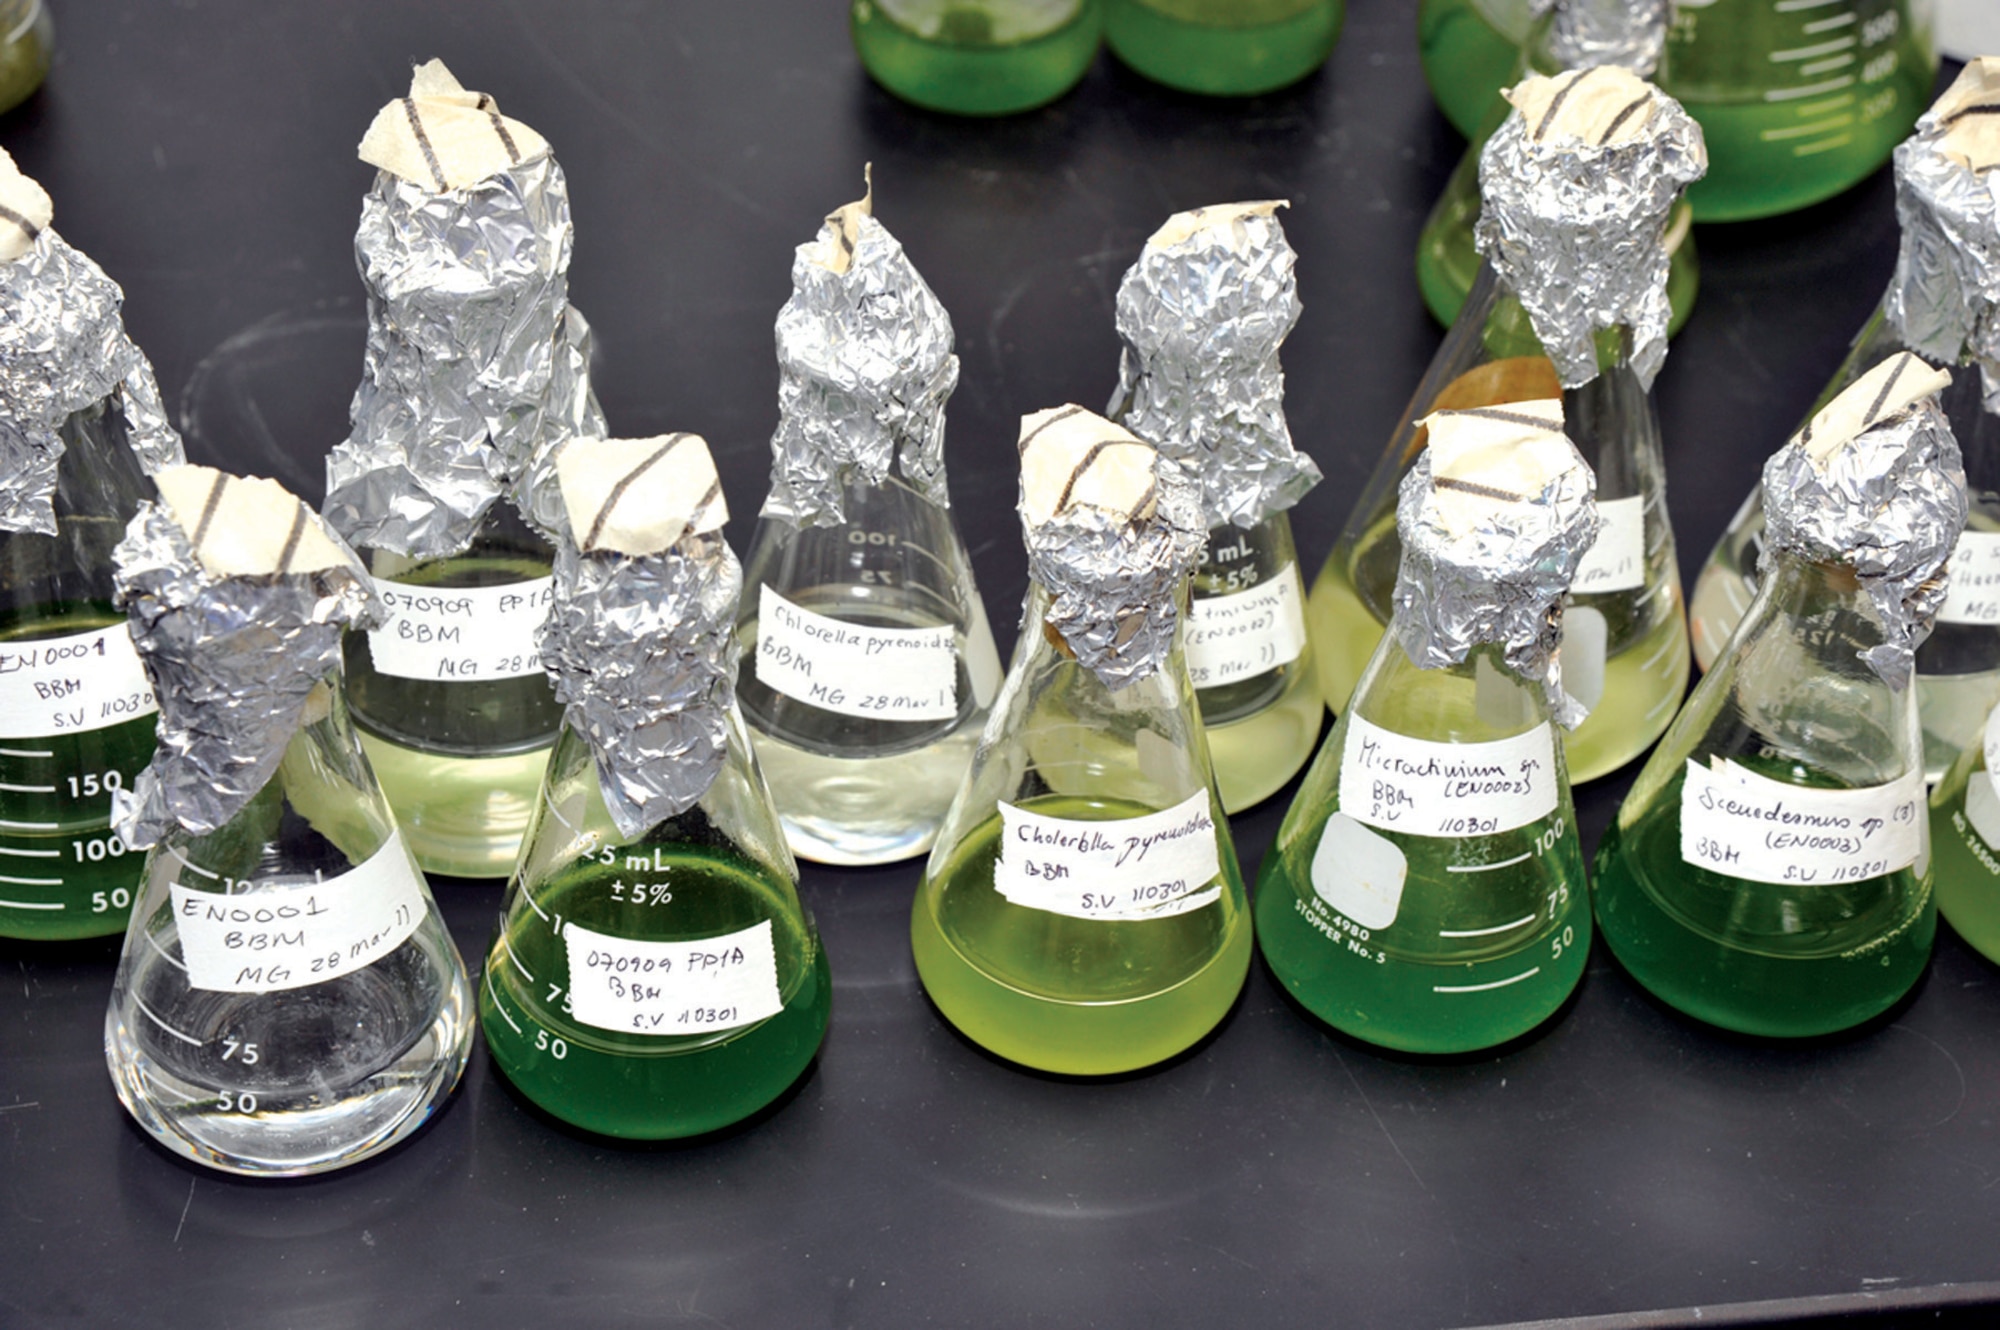 Glass beakers and aluminum foil mark the beginning for different breeds of algae, as part of the Life Sciences Research Center’s research into harvesting algae for biofuels. (U.S. Air Force Photo by Bill Evans)